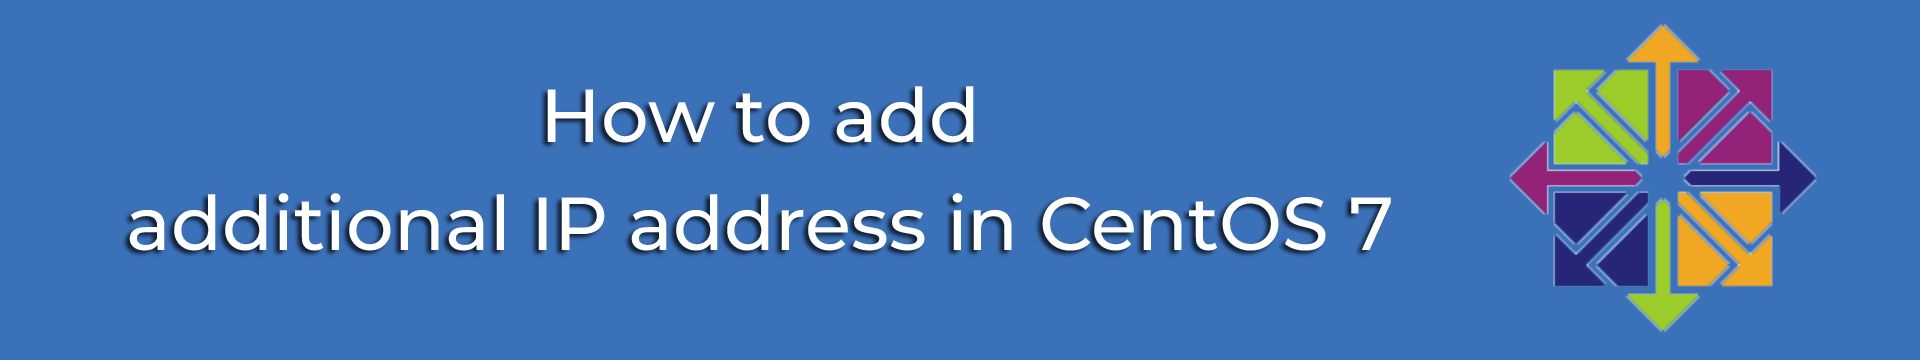 How to add an additional IP address in CentOS 7